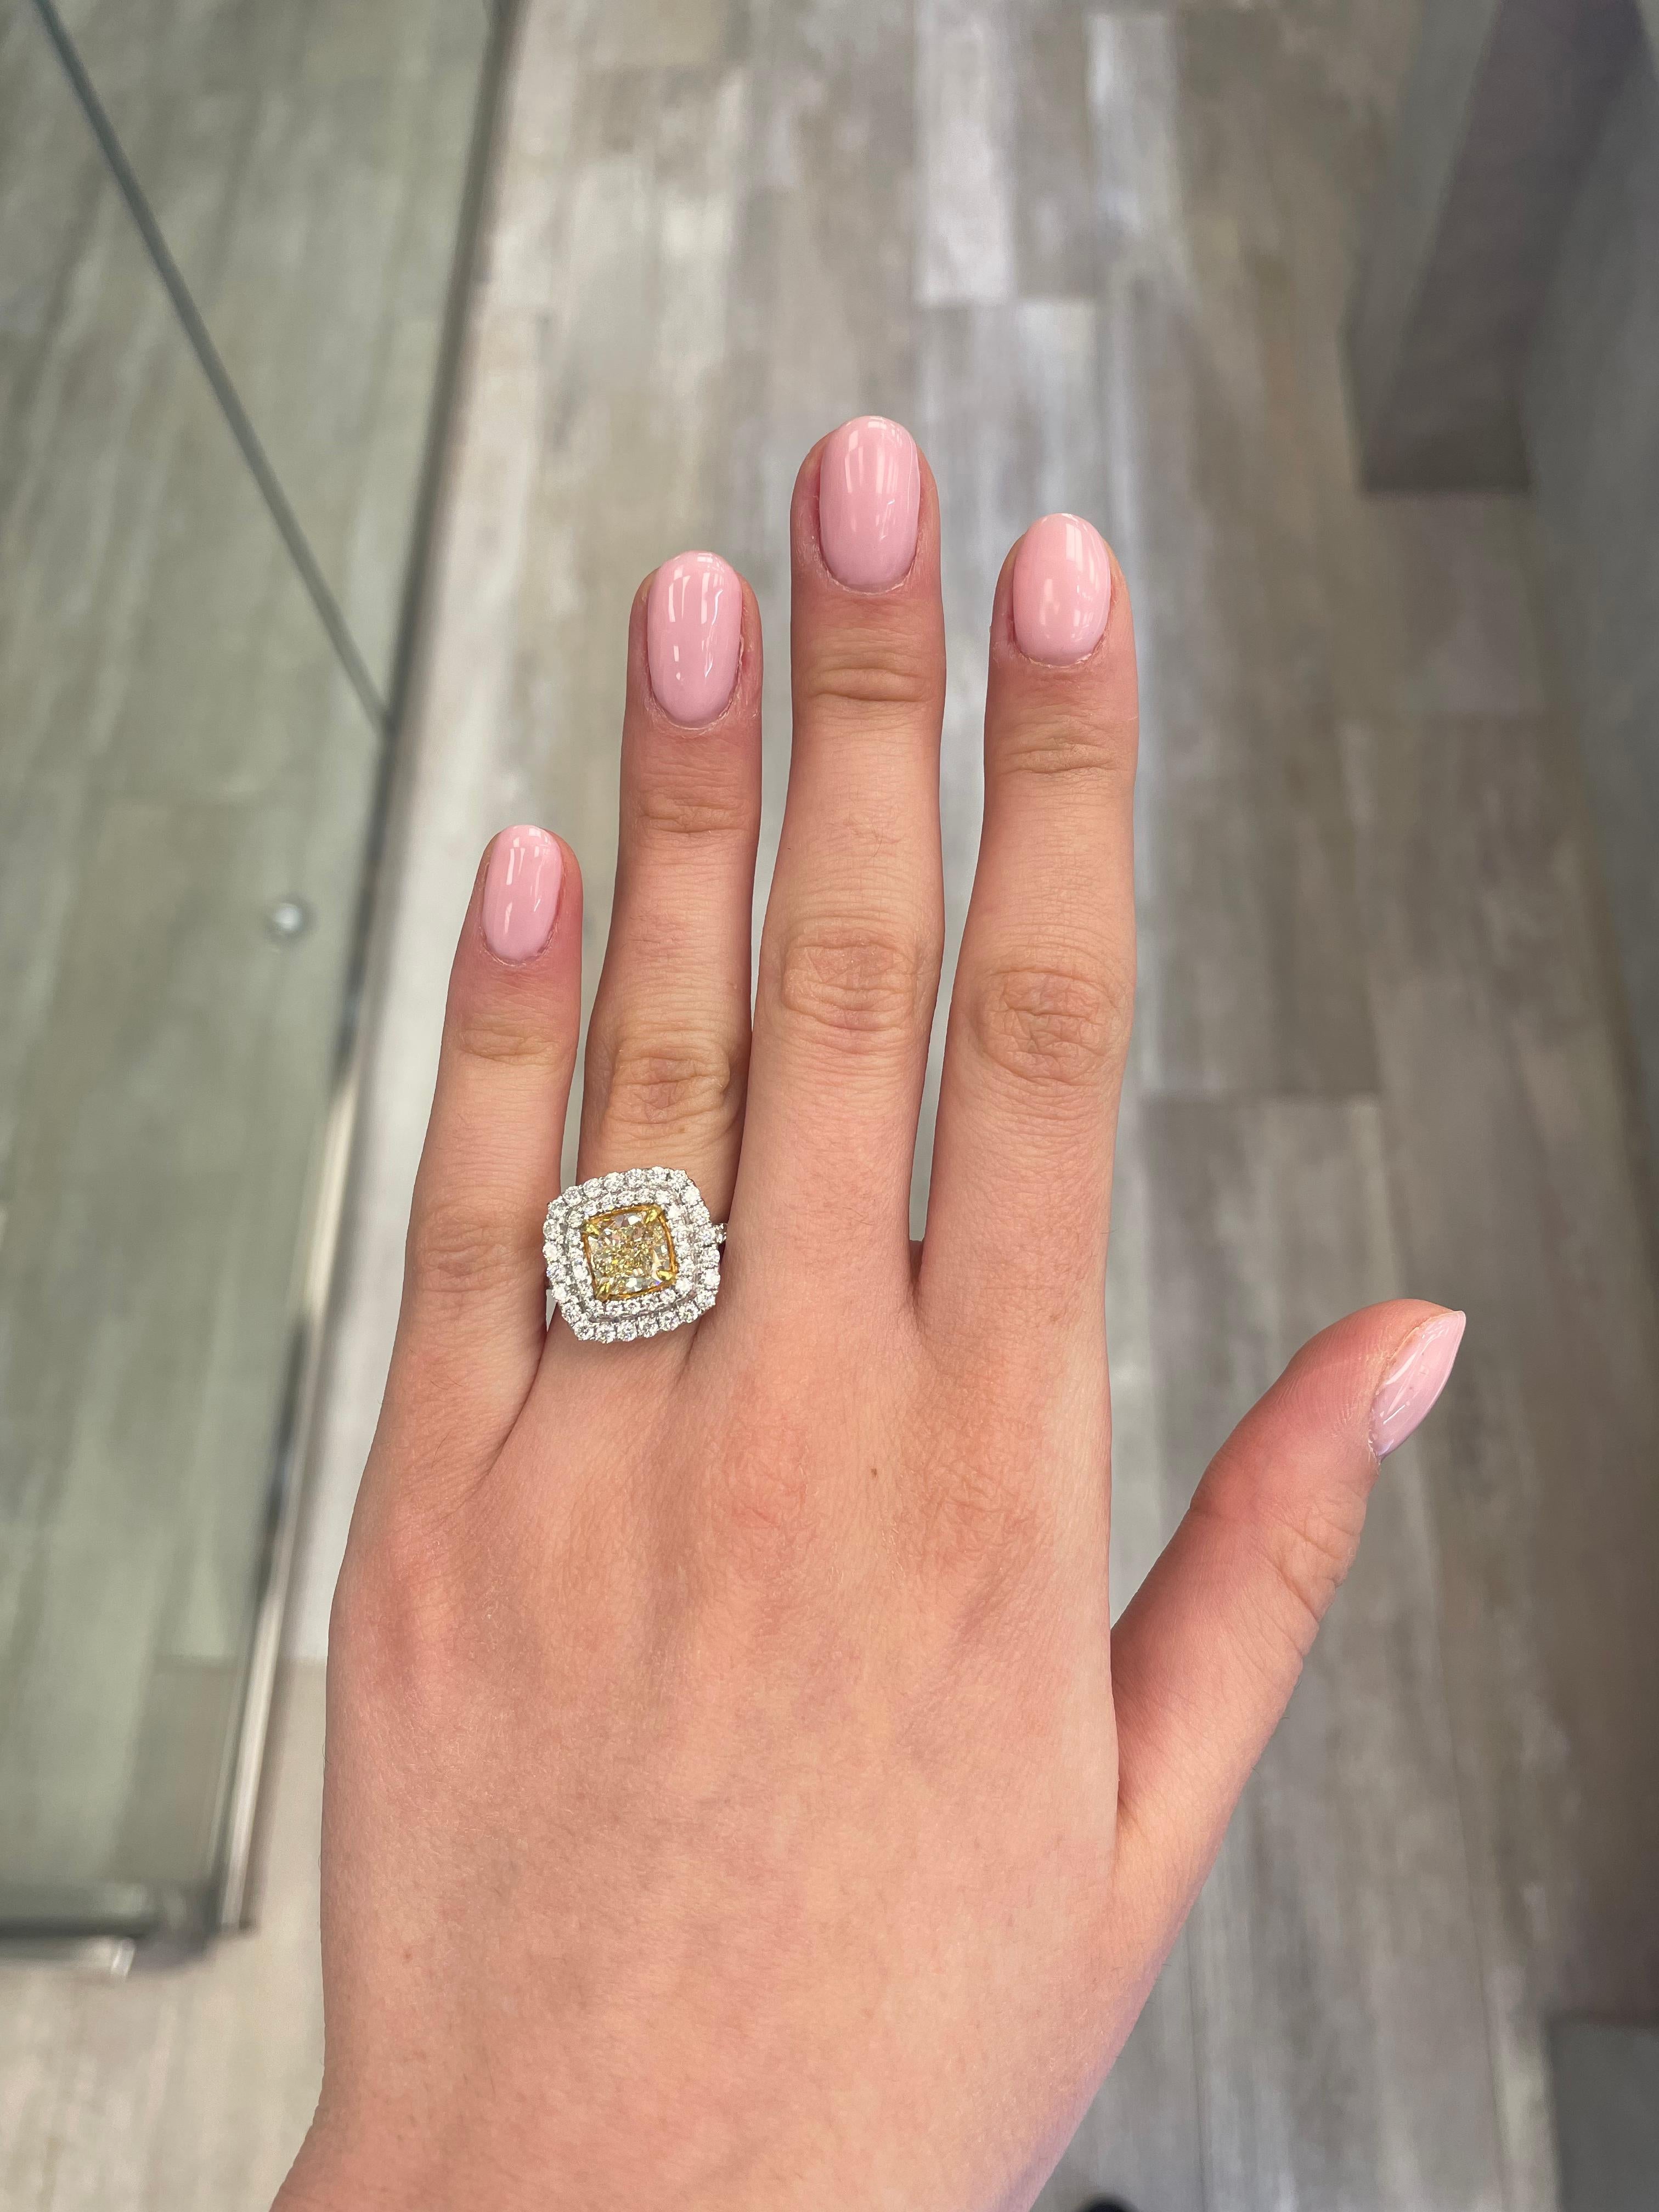 Stunning modern EGL certified yellow diamond double halo ring, two-tone 18k yellow and white gold. By Alexander Beverly Hills
3.08 carats total diamond weight.
2.05 carat cushion cut Fancy Yellow color and VS1 clarity diamond, EGL graded in the